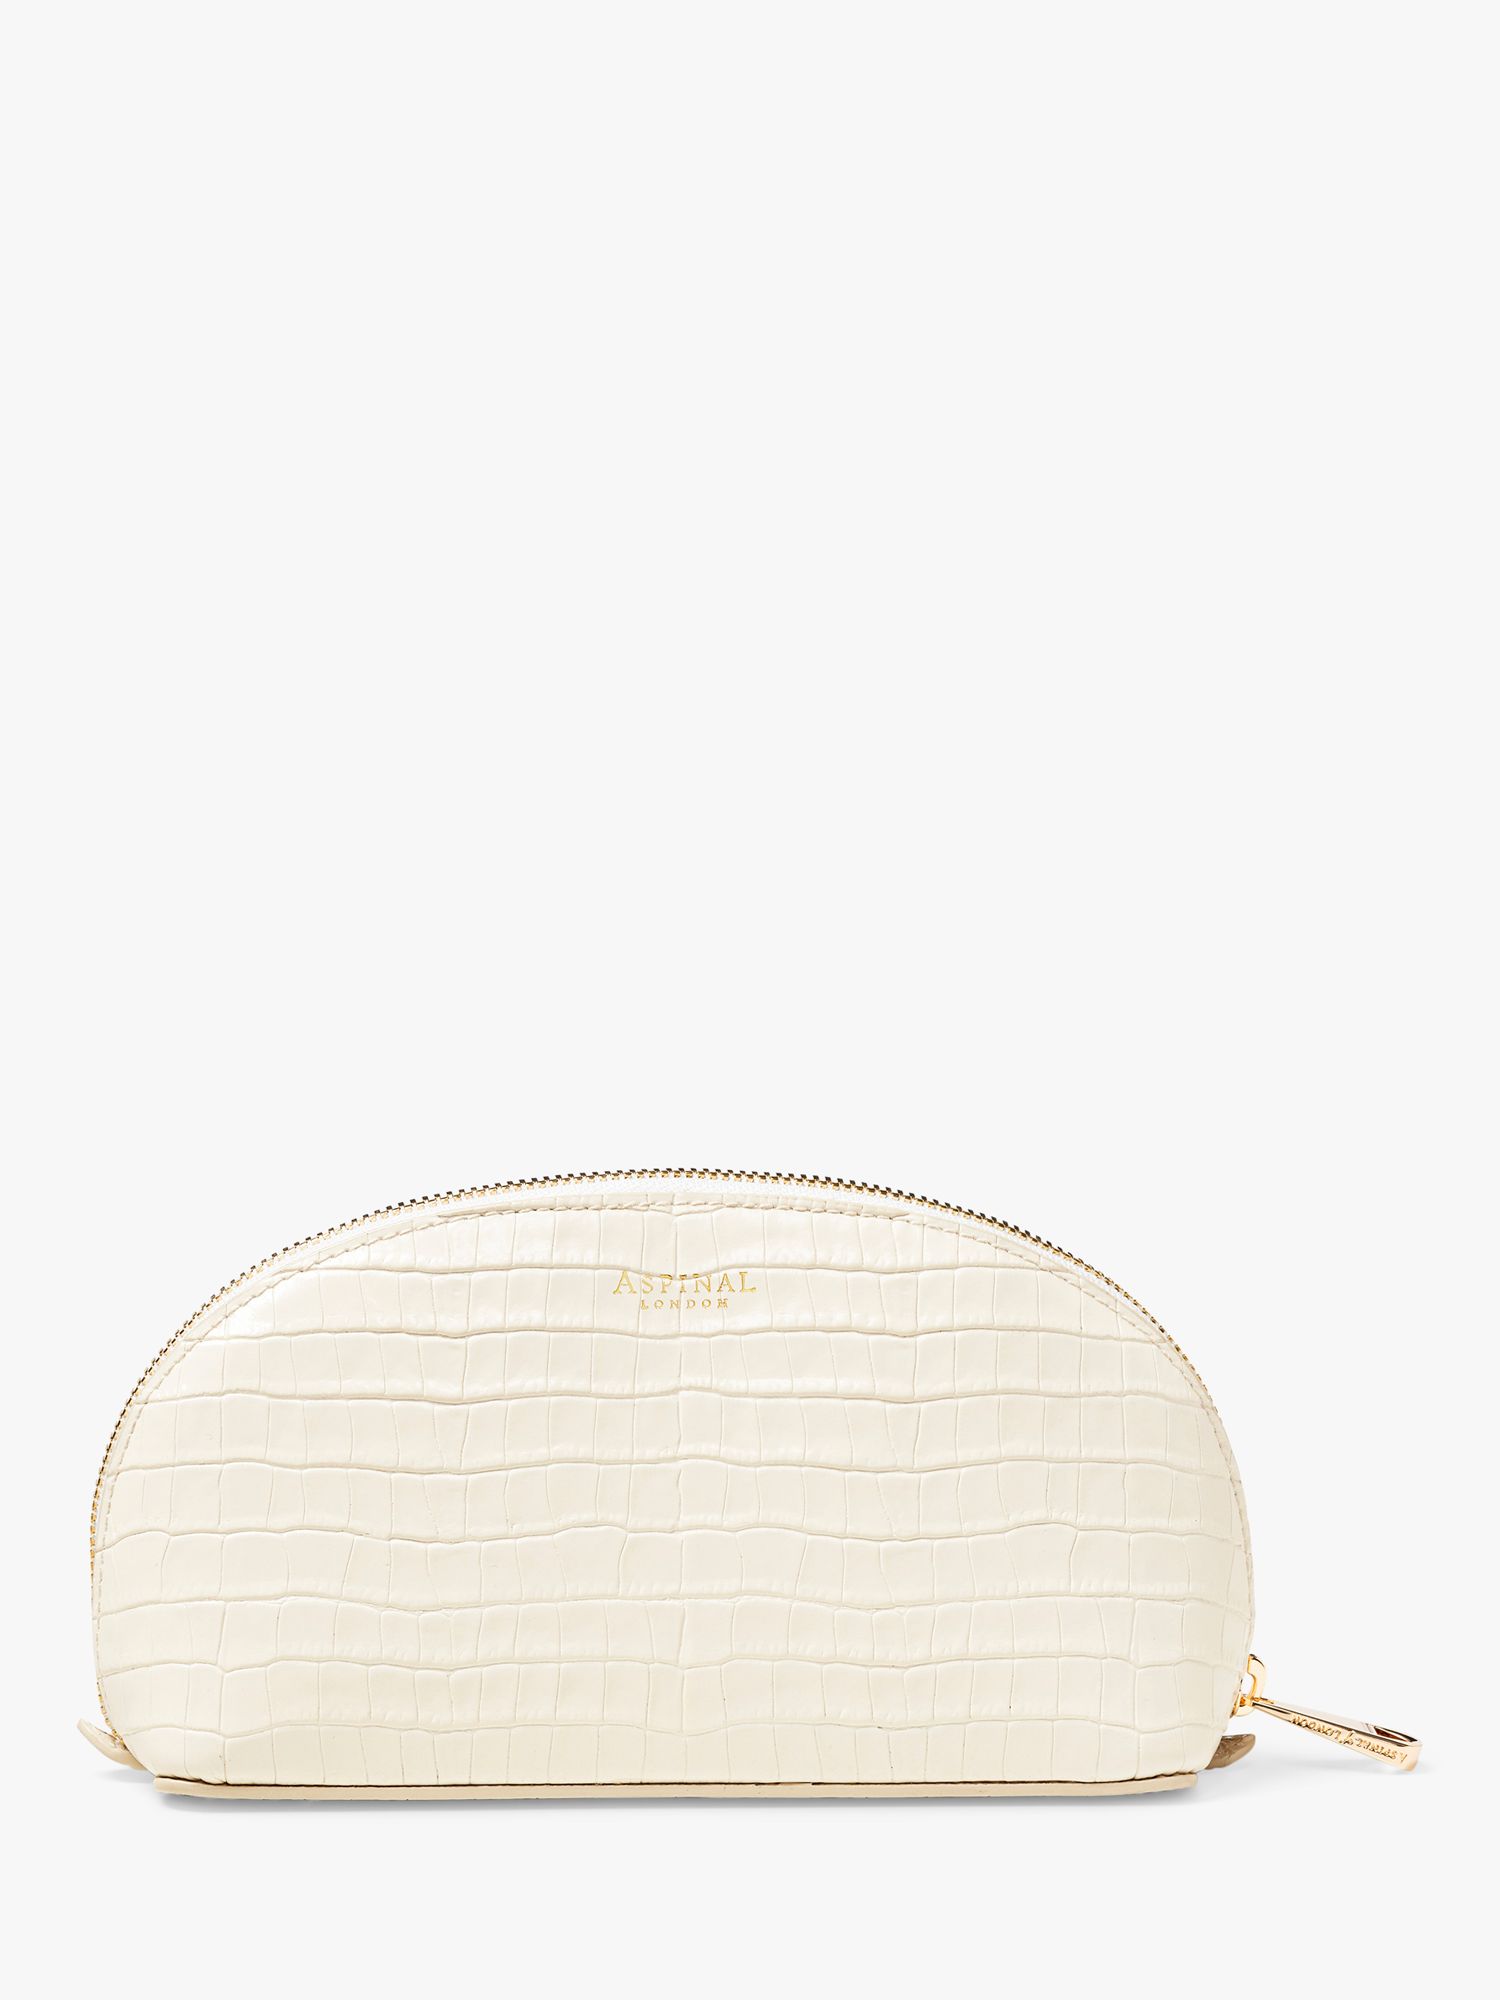 Aspinal of London Small Croc Effect Leather Makeup Bag, Ivory